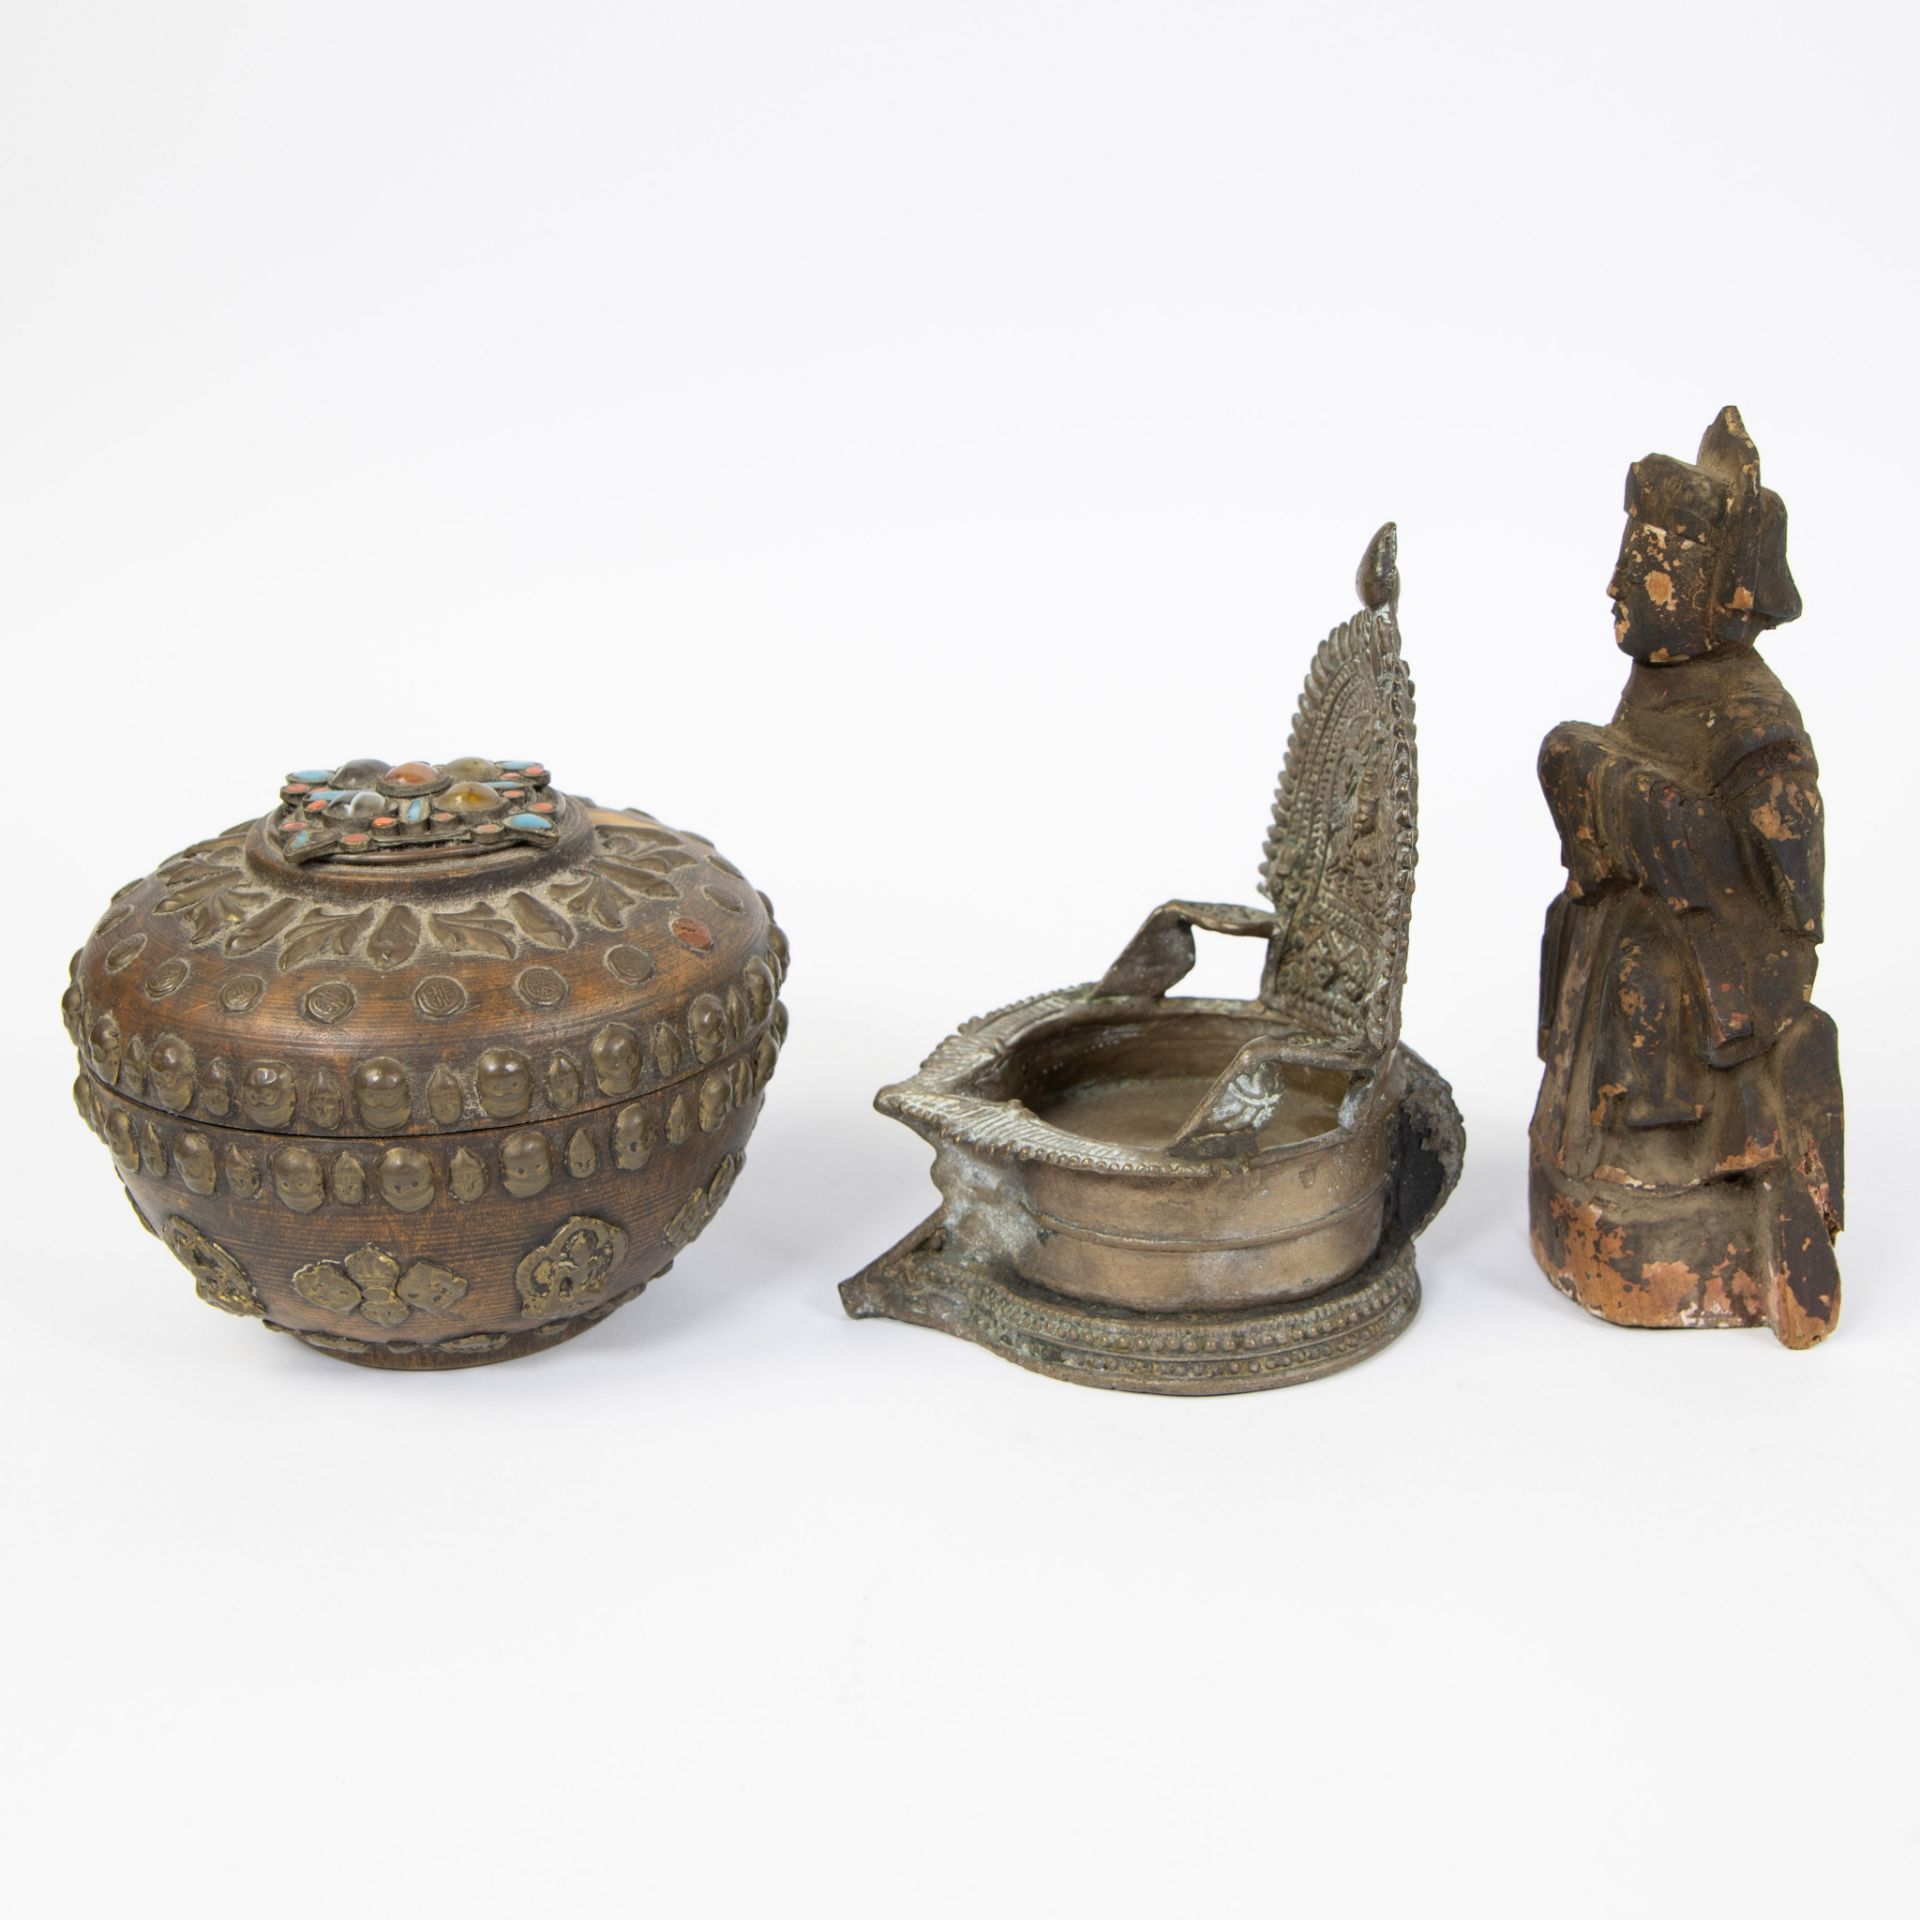 Collection of Tibetan, offering pot inlaid with stones and skulls, bronze oil lamp and wooden Buddha - Image 2 of 5